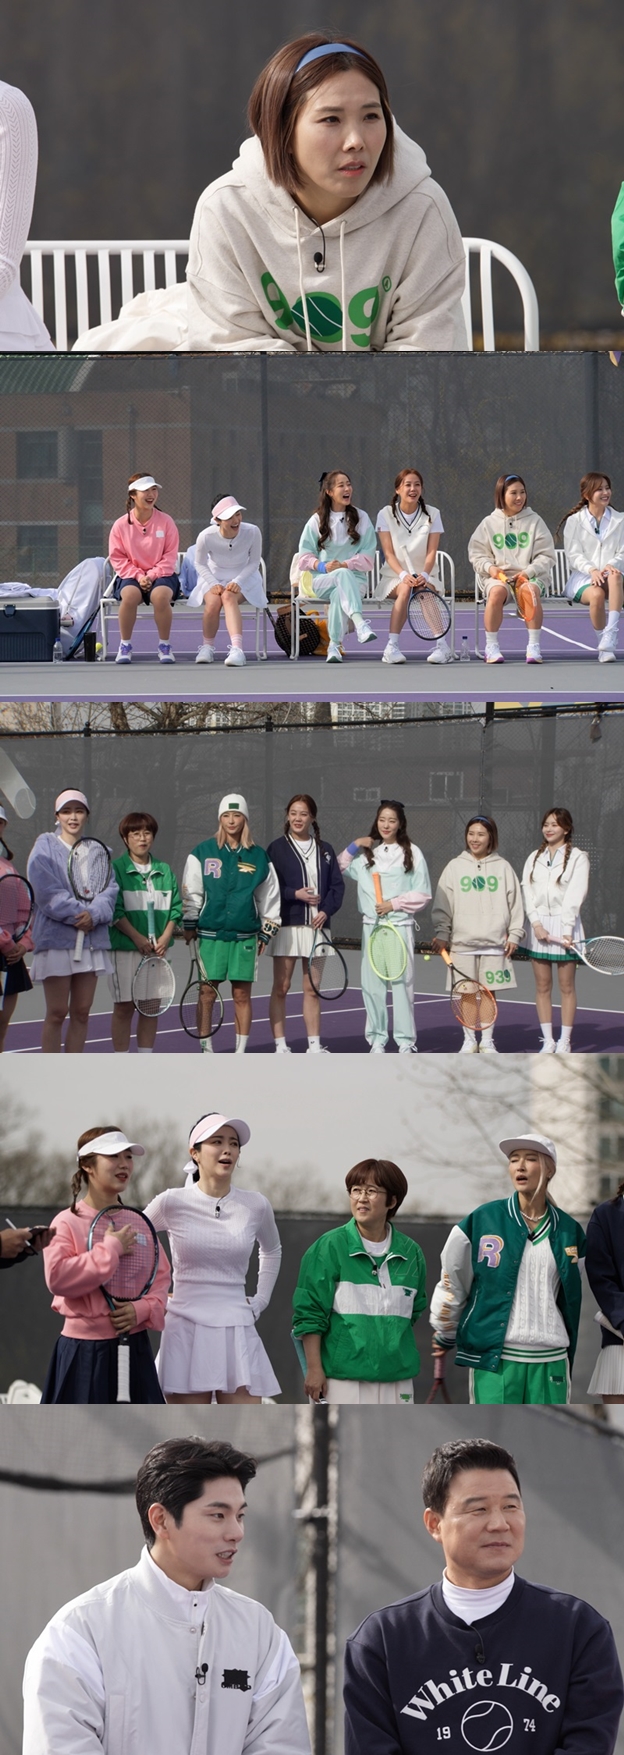 Lee Hyung-taik, director of Legend of Korean tennis, will perform seven missions to Song Eun-yi, Hong Soo-ah, Huang Bo, Shin Bong-sun, Go Woo-ri, Go Eun-ah,MBNs Winning Shot Tomorrow (Winning Shot Tomorrow)In the third session, Lee Hyung-taik will take the time to evaluate the mission performance to check the homework given to each member.Lee Jung-yoon, Kochi, played lightly against the former player, and Lee Hyung-taik, who watched this, said, Hong Soo-ah would have hit really hard.Song Eun-yi is a stable player in our team. Huang Bo is also strong and needs to practice a little. In the upcoming Mission Performance Assessment, Lee Hyung-taik told Go Eun-ah, I think I can run a little more confidently, and Go Woo-ri, who showed a calm rally, Oh, good.Prior to Lee Hyung-taiks evaluation, Huang Bo said, I did not practice because I was trembling. Sohn Hyuk-jin Kochi!I have to say that I did well in that practice. For a while, Lee Hyung-taiks praise of Nice ~ is praised.In particular, Hong Soo-ah wears a pure white costume and enjoys a coat, showing off his talent and receiving a praise of claiming too! Song Eun-yi said, Is not it like a pretty mother?Shin Bong-sun said, She wears two locks a month, she said.Hong Soo-Ah, who laughed at the unexpected Disclosure, said, Oh, do not laugh.In the meantime, Lee Hyung-taiks advice is learned like a sponge, corrected immediately and set an example as a captain.On the other hand, Song Eun-yi is the first batter to prepare a one-on-one revenge on the court. Song Eun-yi said, Huang Bo, you come out!My goal is chrysanthemum. After declaring war, he tells the story of Huang Bo in detail and immerses everyone.Winning shot tomorrow. The third episode will be broadcasted at 10:20 pm on the 28th.Photo=MBN